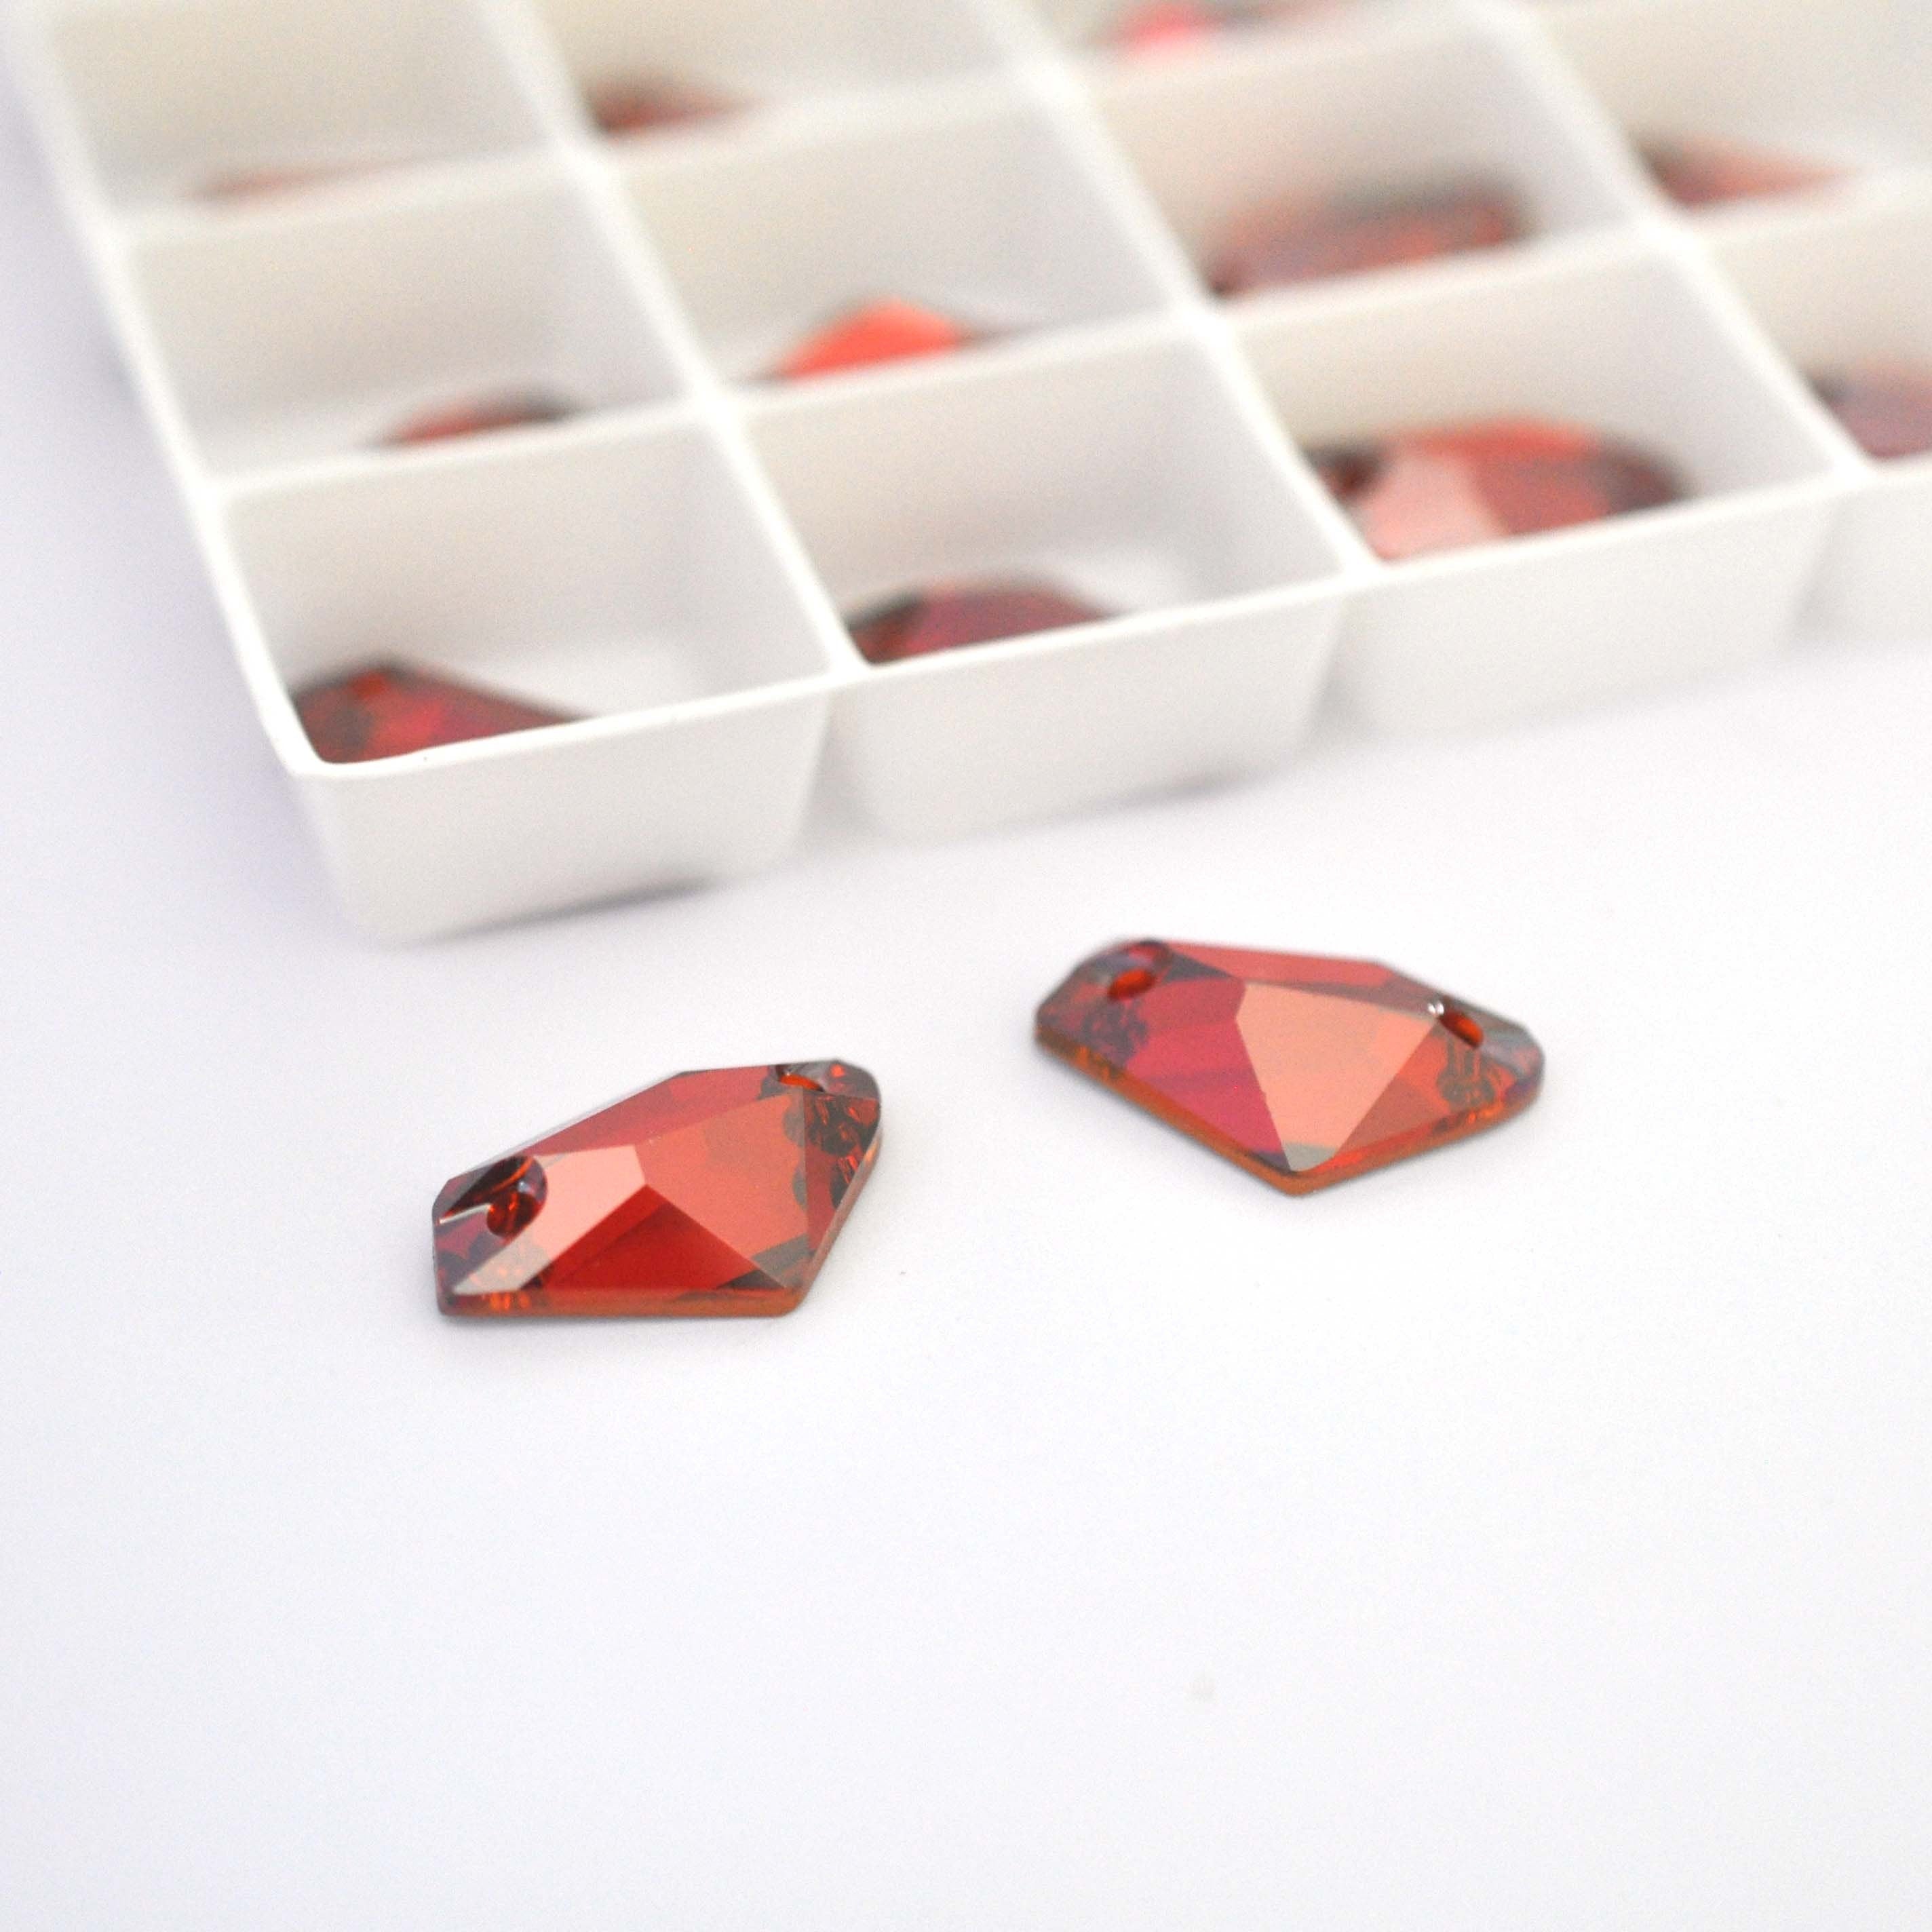 Red Magma Crystal 2 Hole Sew On Stones 3256 Barton Crystal 19x11.5mm